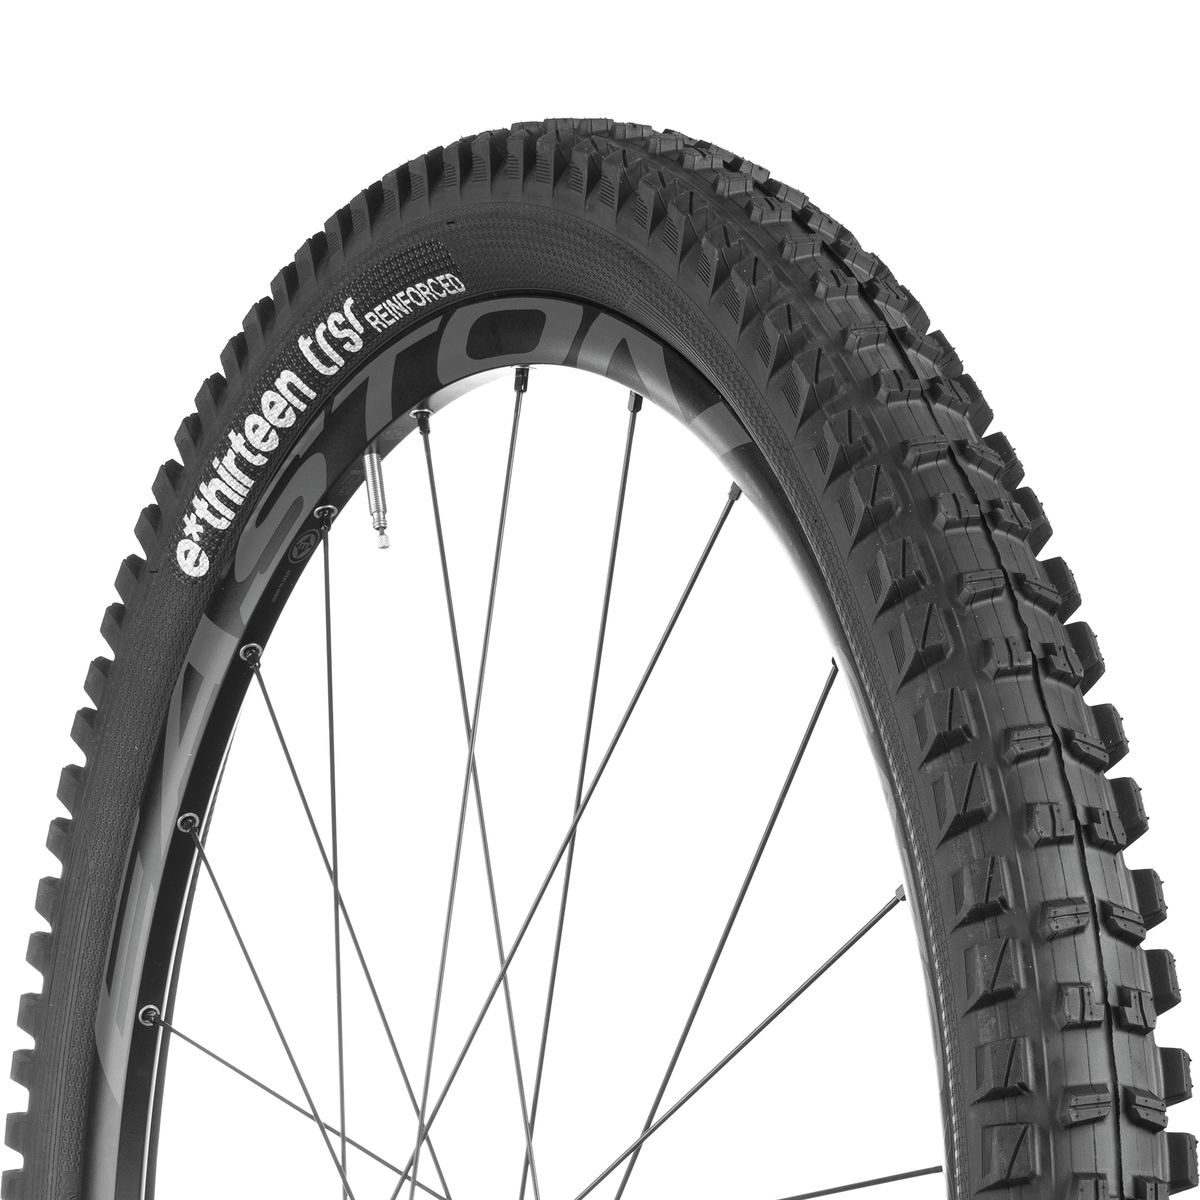 ethirteen components TRS Race Tire 29in